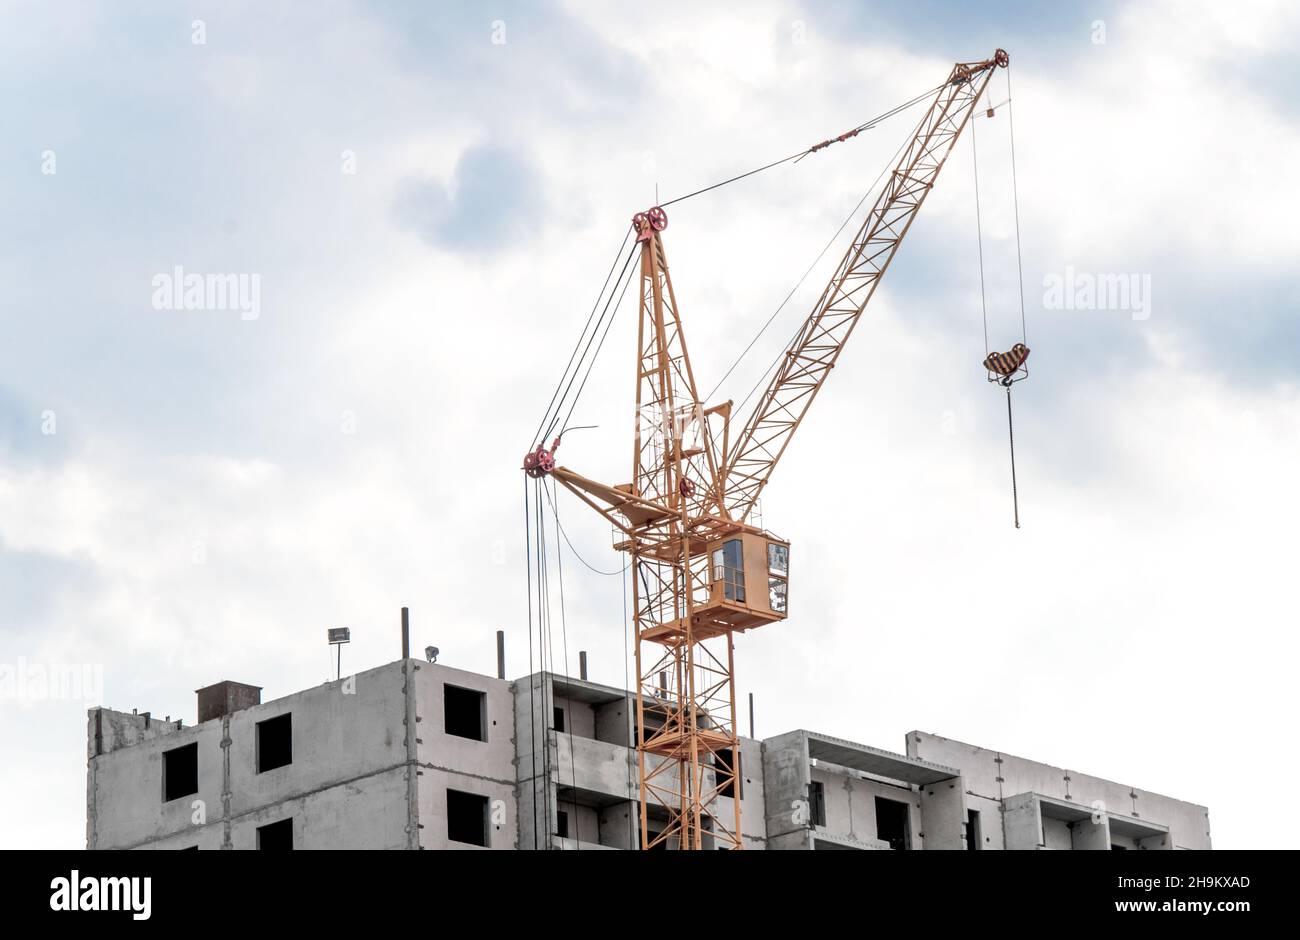 Crane and building construction against blue sky. Stock Photo